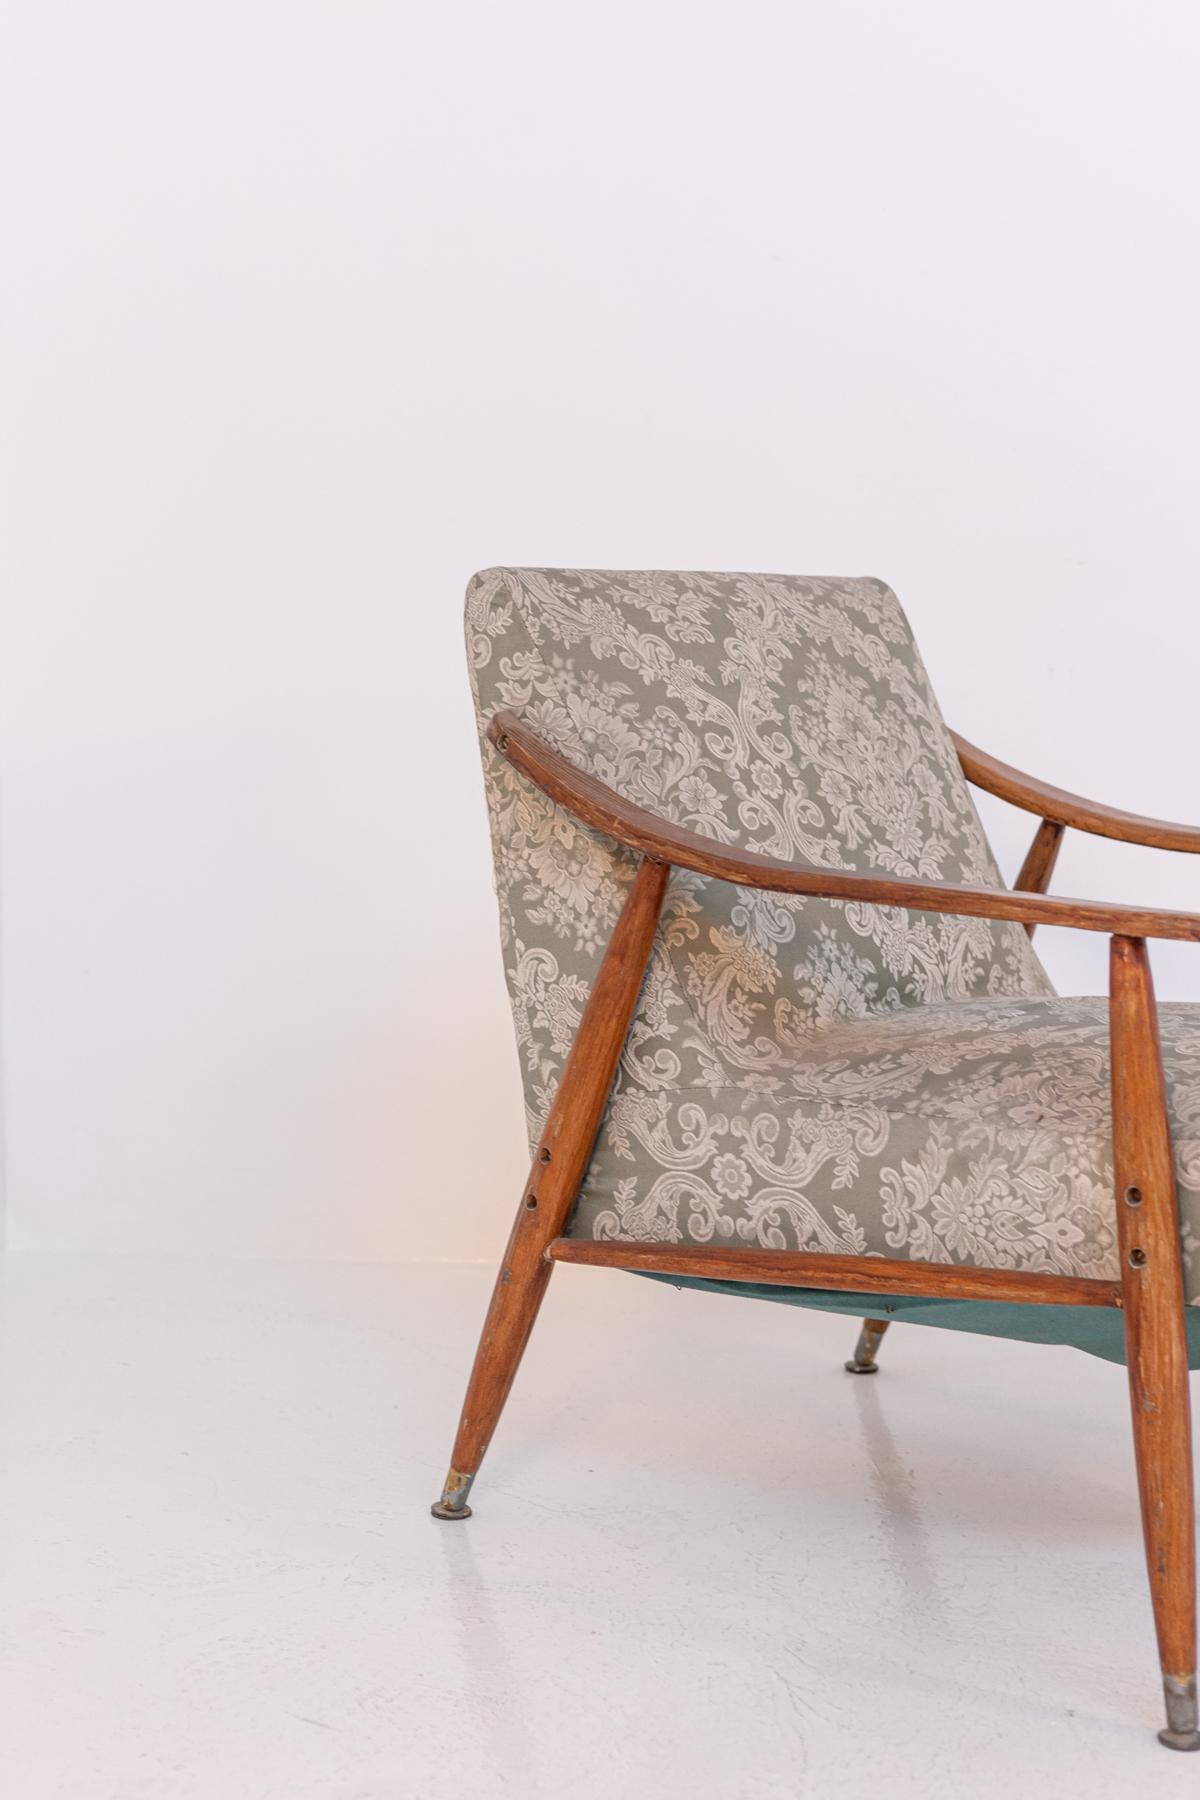 Rare Nordic armchair of the 50s. The structure is made of wood. Its typically Nordic lines and Scandinavian design give the seat modernity and essentiality, in fact its essential design is perfect for any type of living room. The seat and backrest